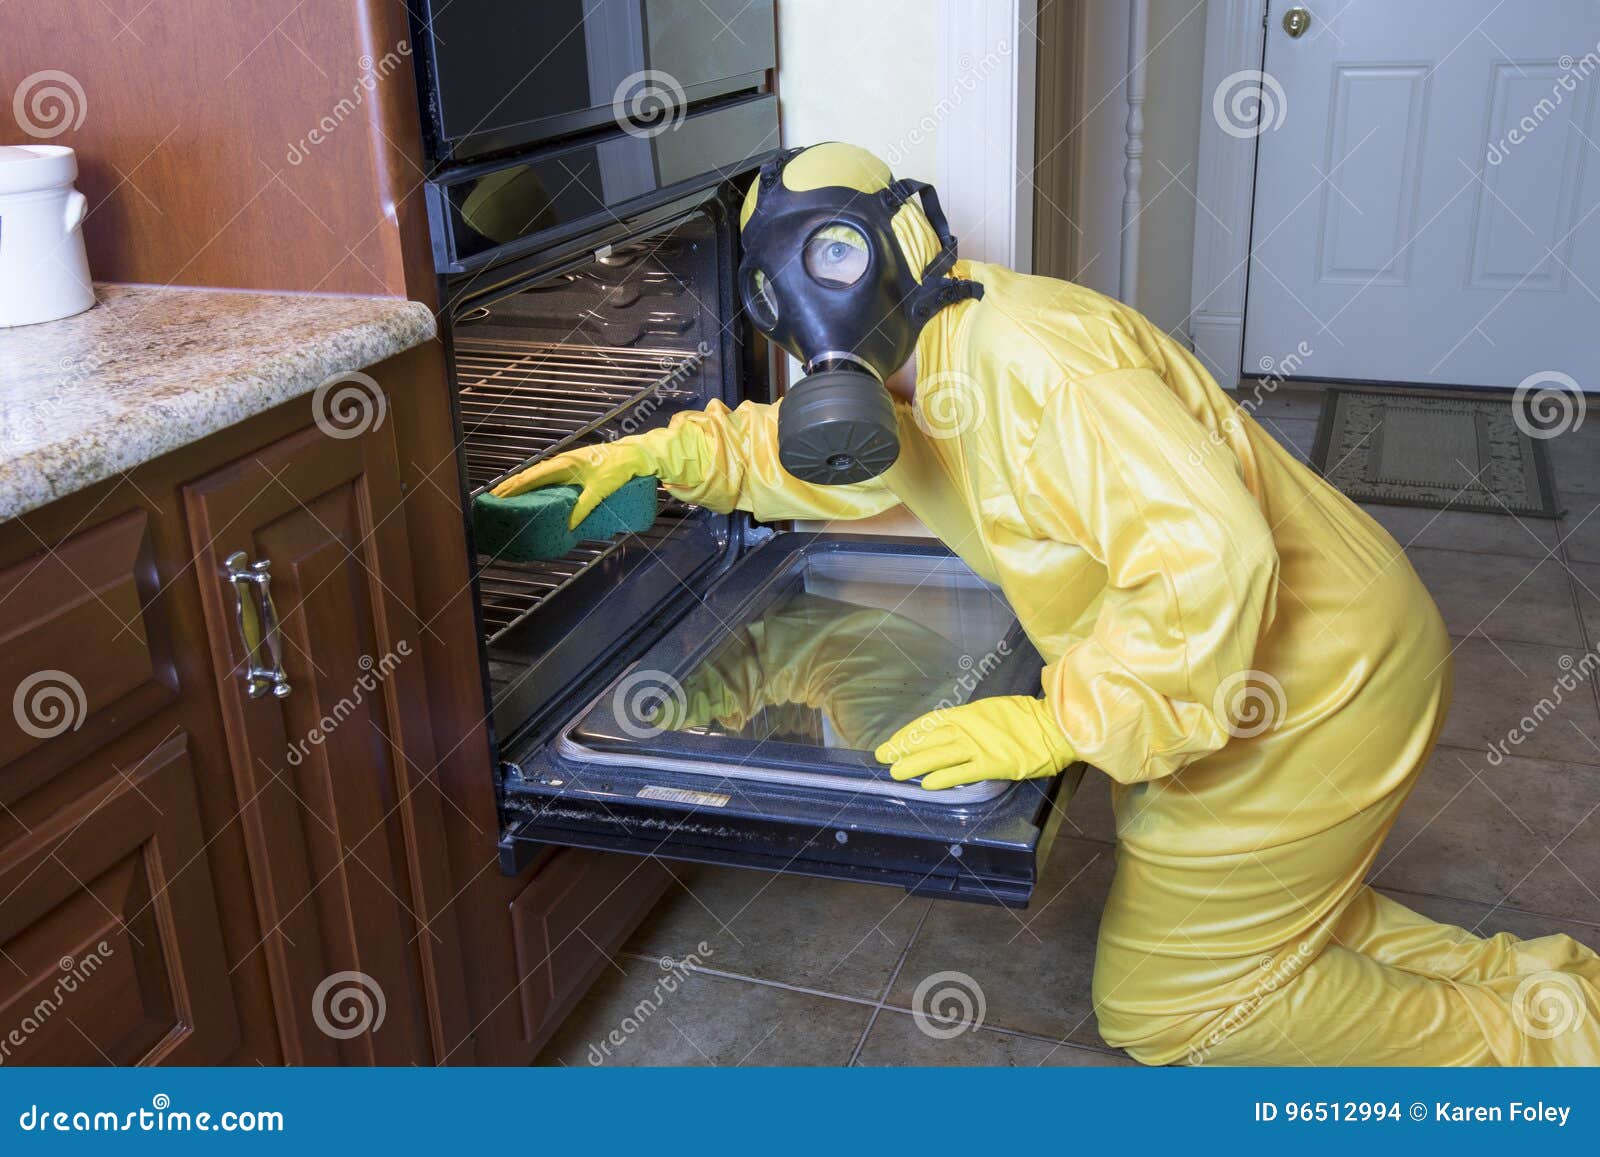 woman in haz mat suit cleaning oven